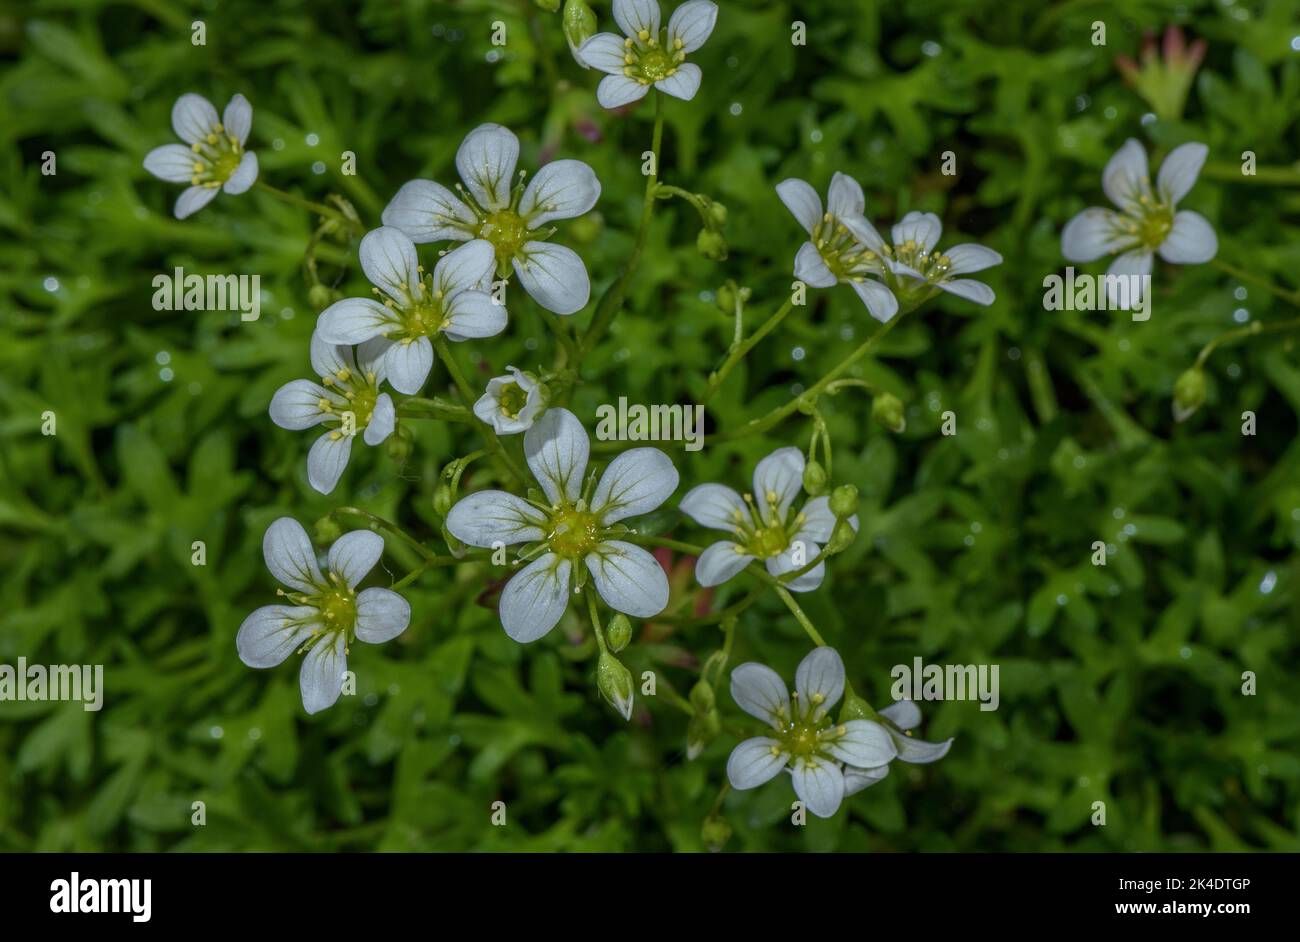 Saxifraga fragilis subsp. paniculata, in flower; Central & Eastern Spain. Stock Photo